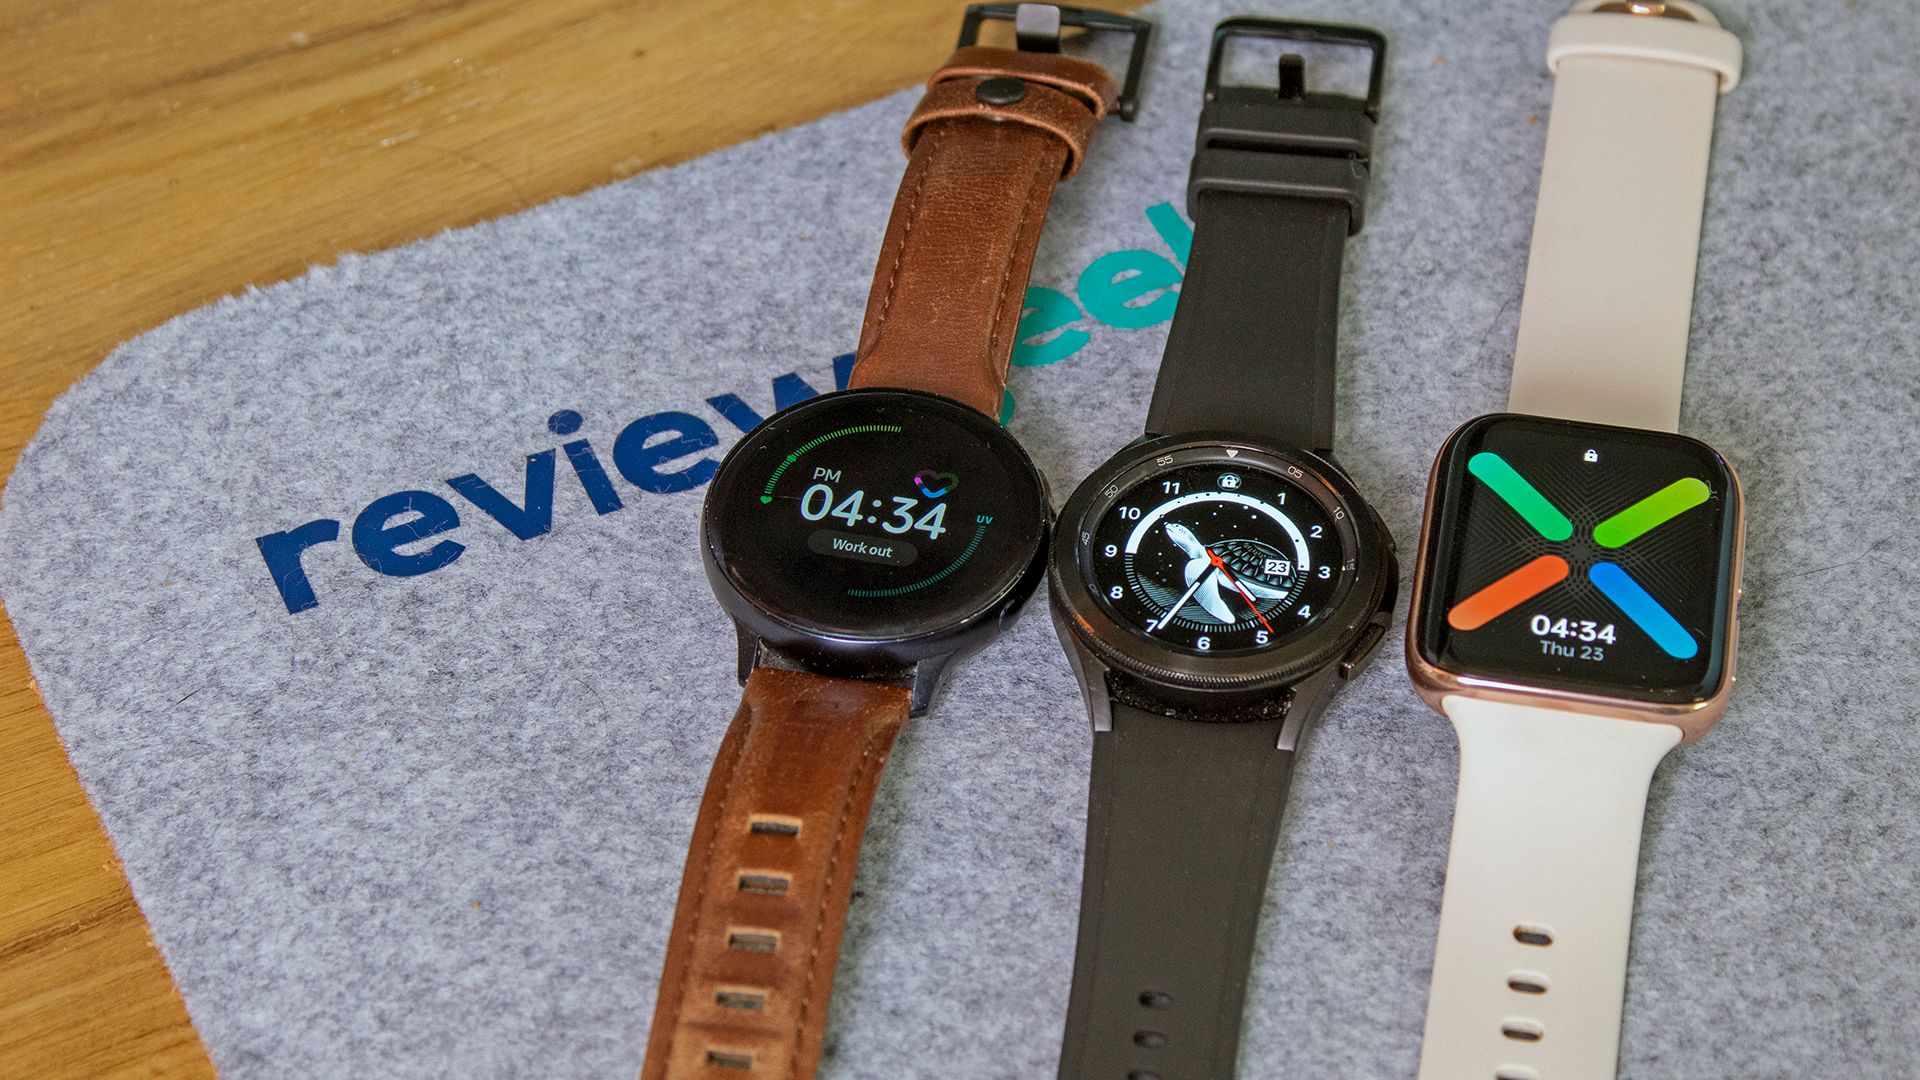 A Galaxy Watch Active 2 next to a Galaxy Watch 4, next to an Oppo Wear OS watch